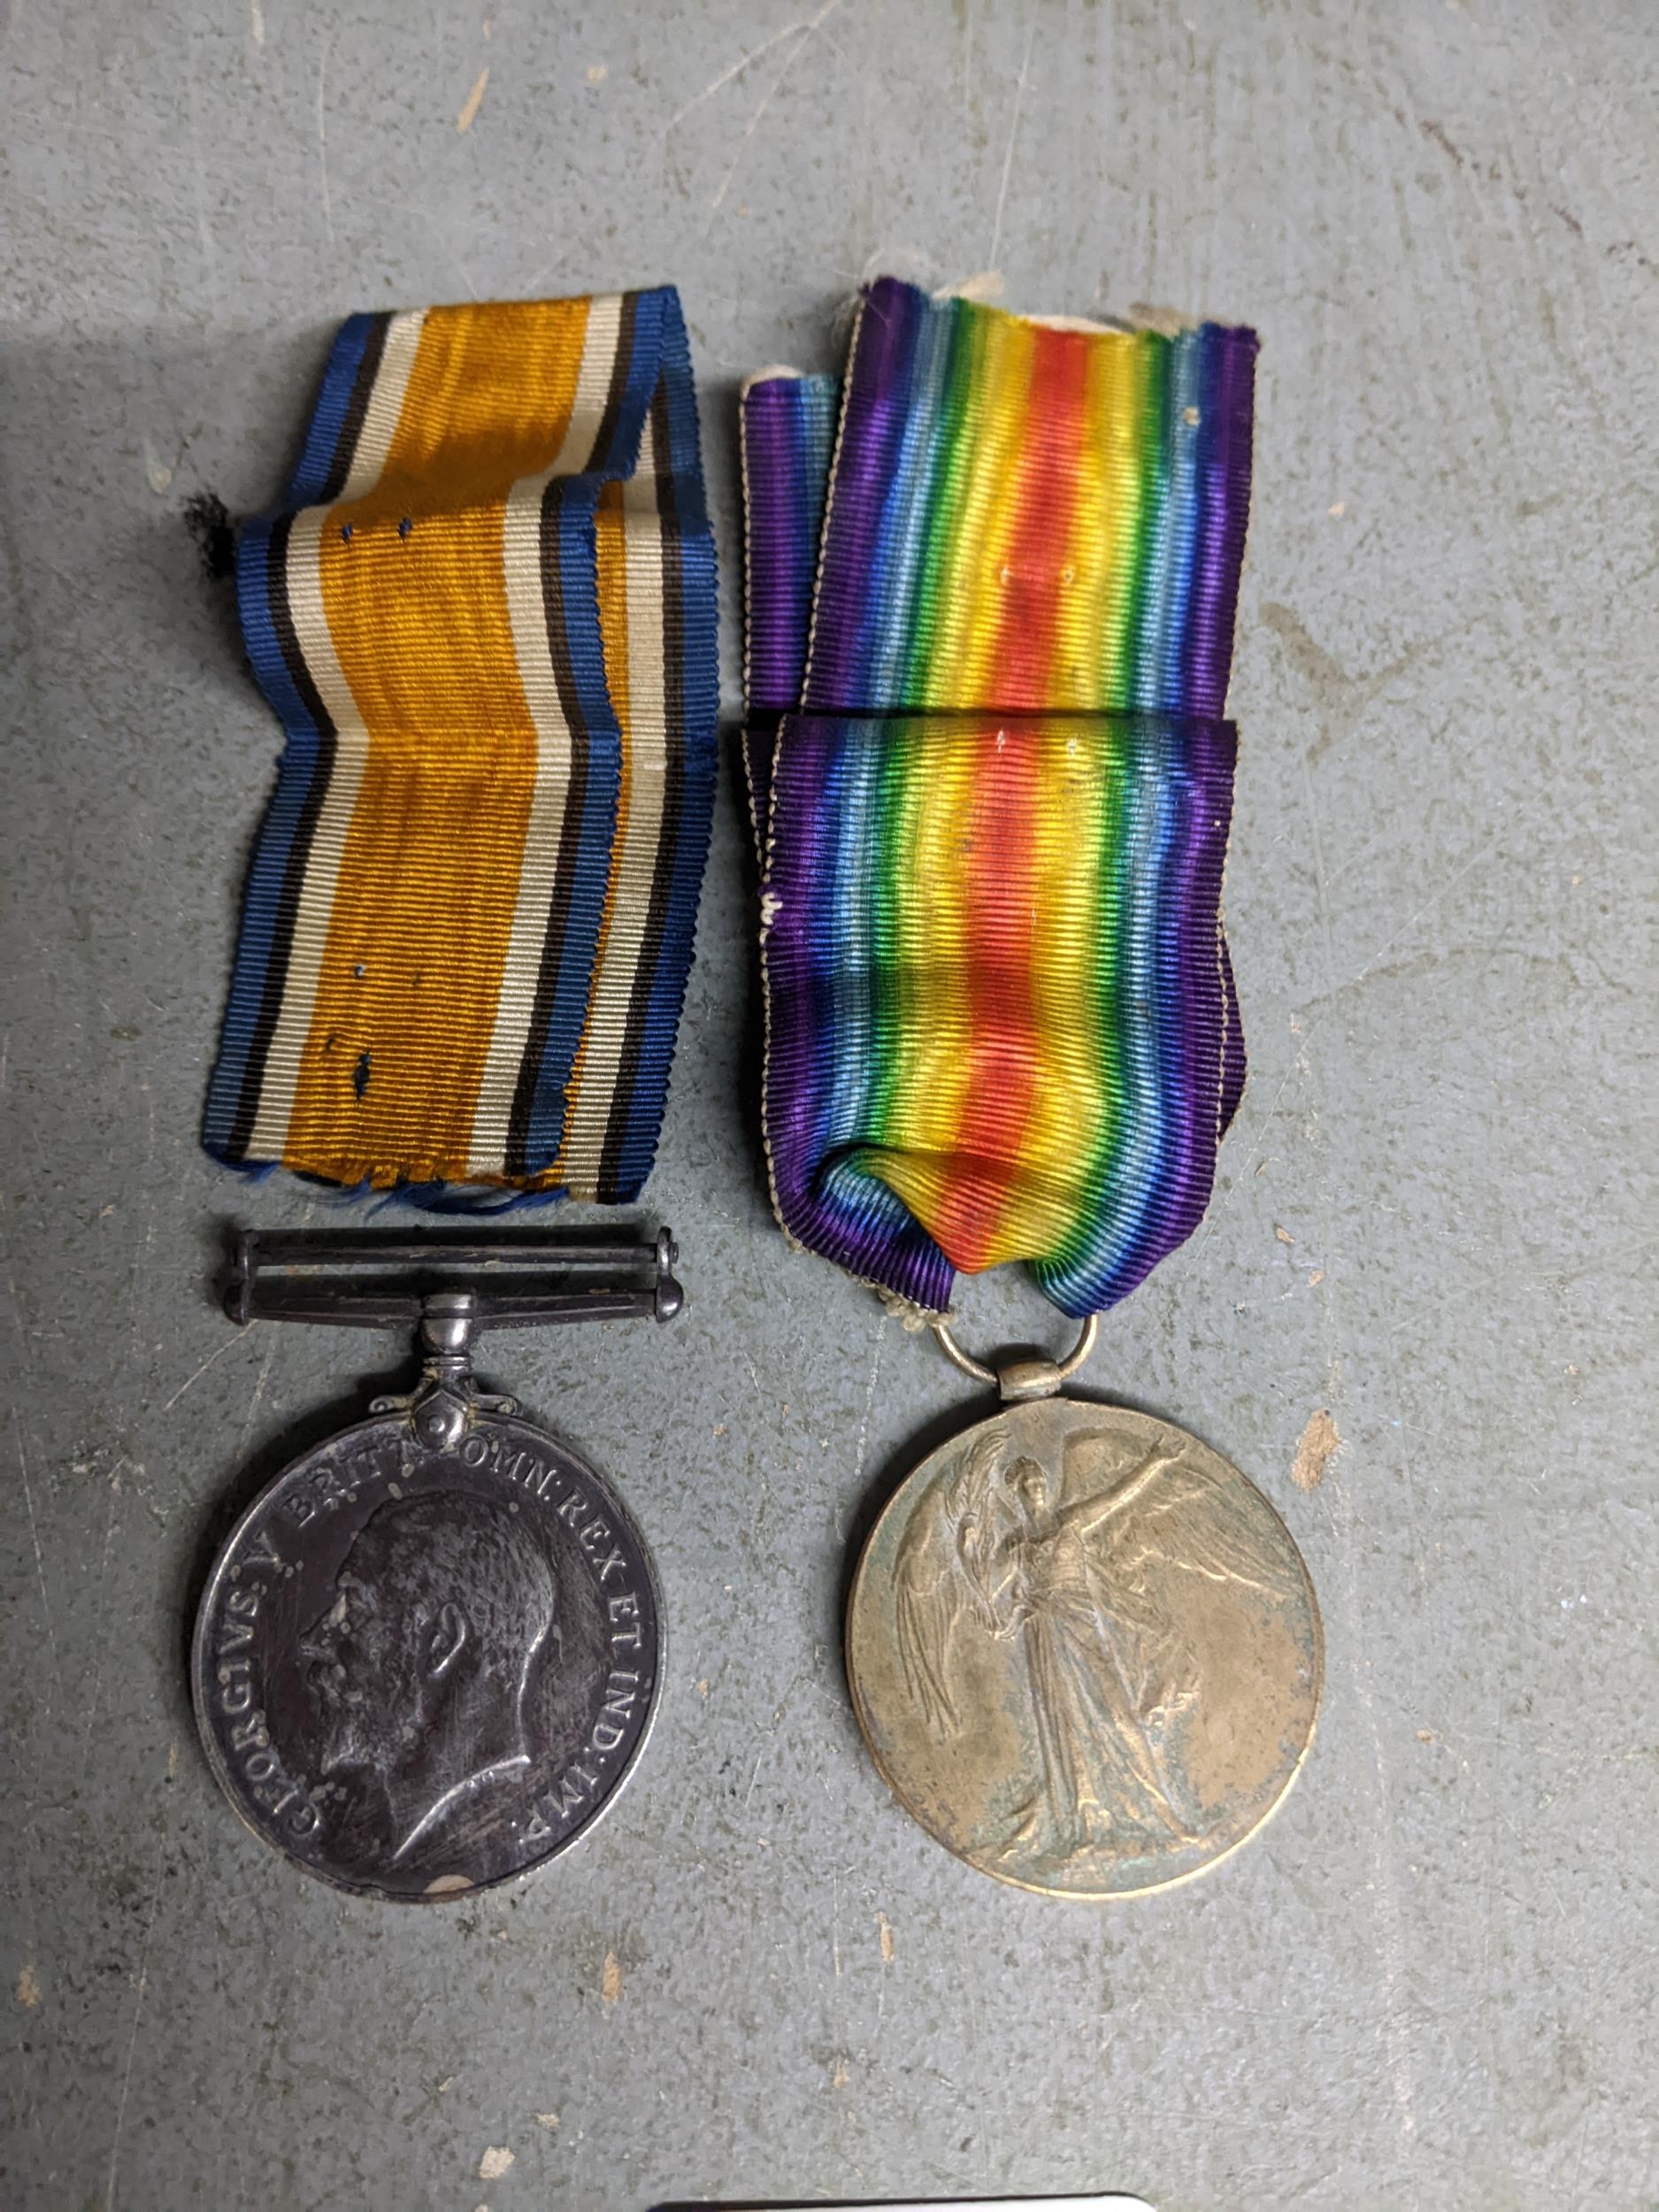 Two 1st world war BWM and Victory medal campaign group ribbons, named to GS -78643Pte G Graver,